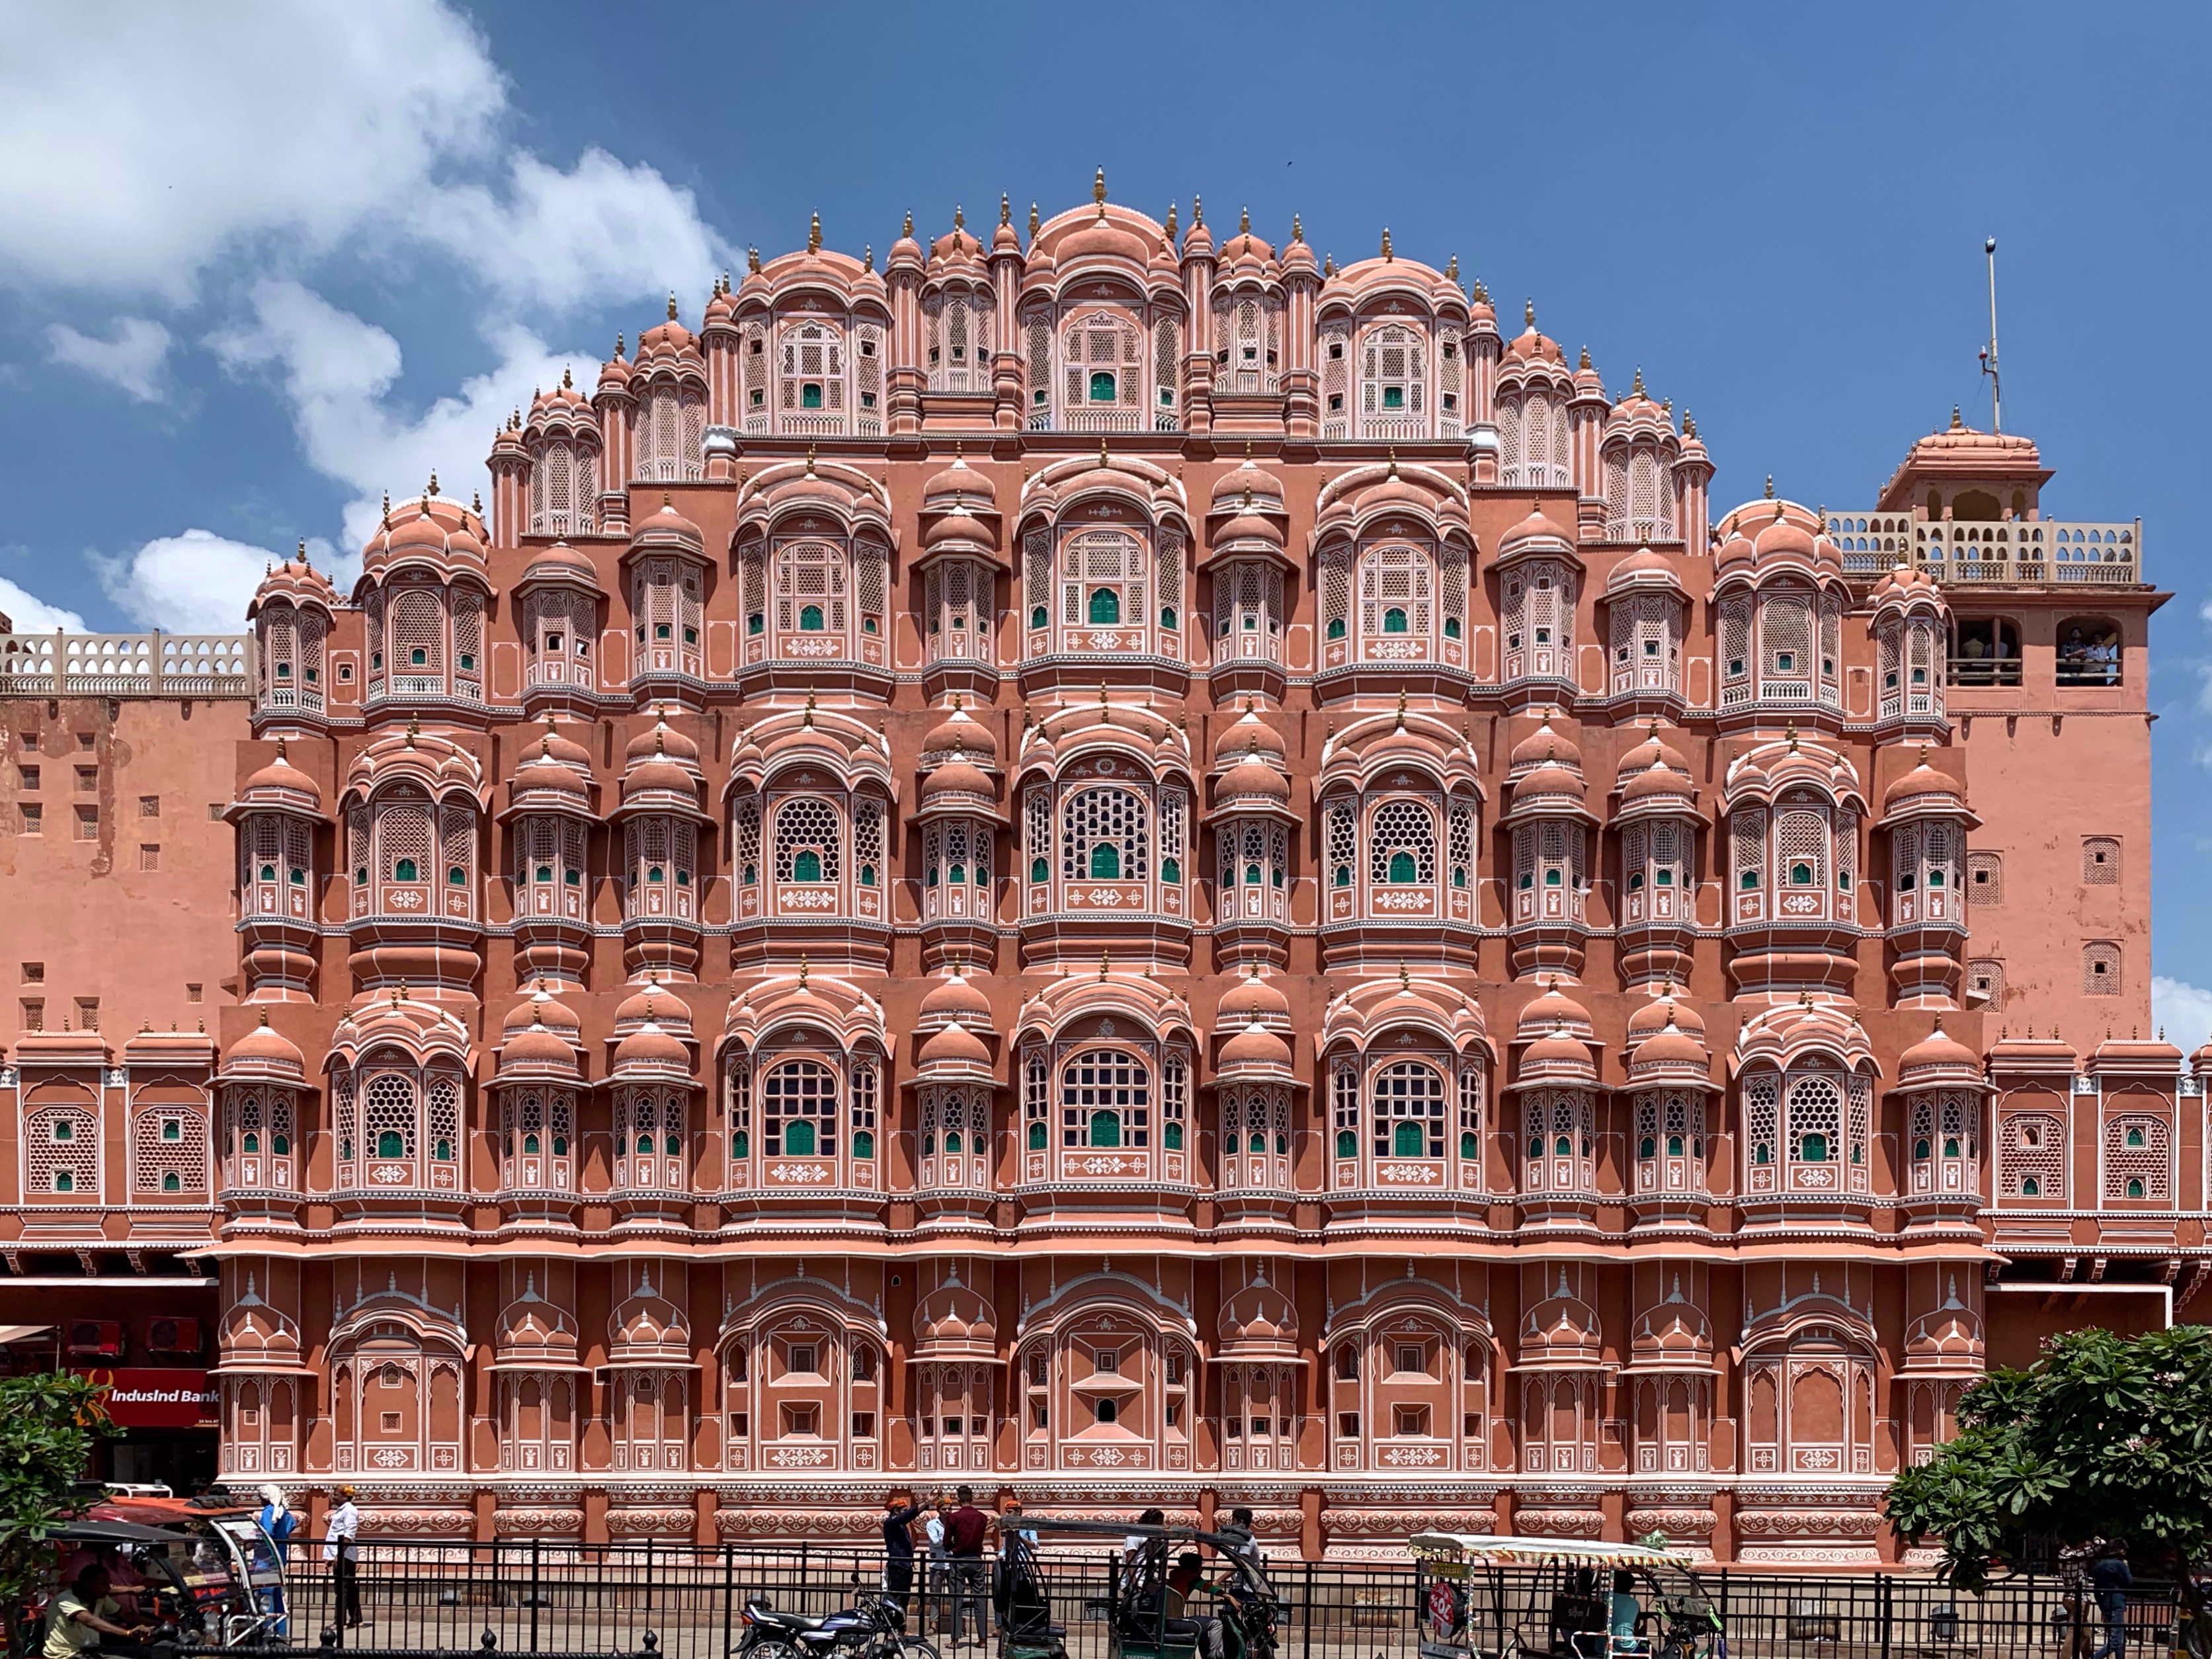 East facade Hawa Mahal Jaipur from ground level %28July 2022%29 img 01